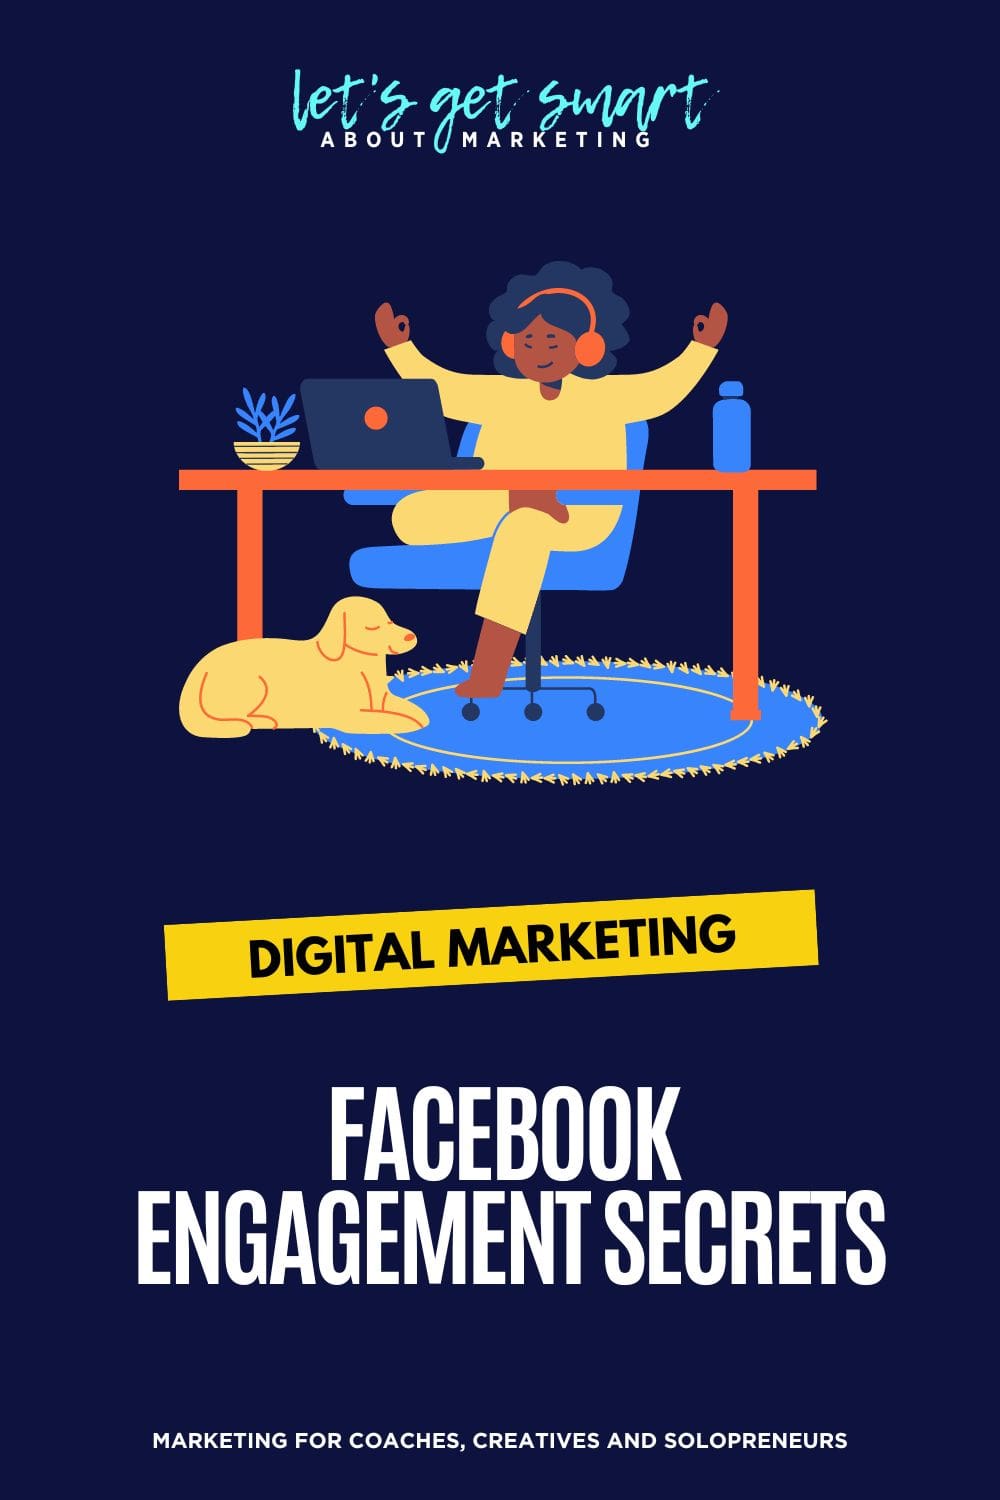 Facebook Engagement What is it and What Does it Mean?